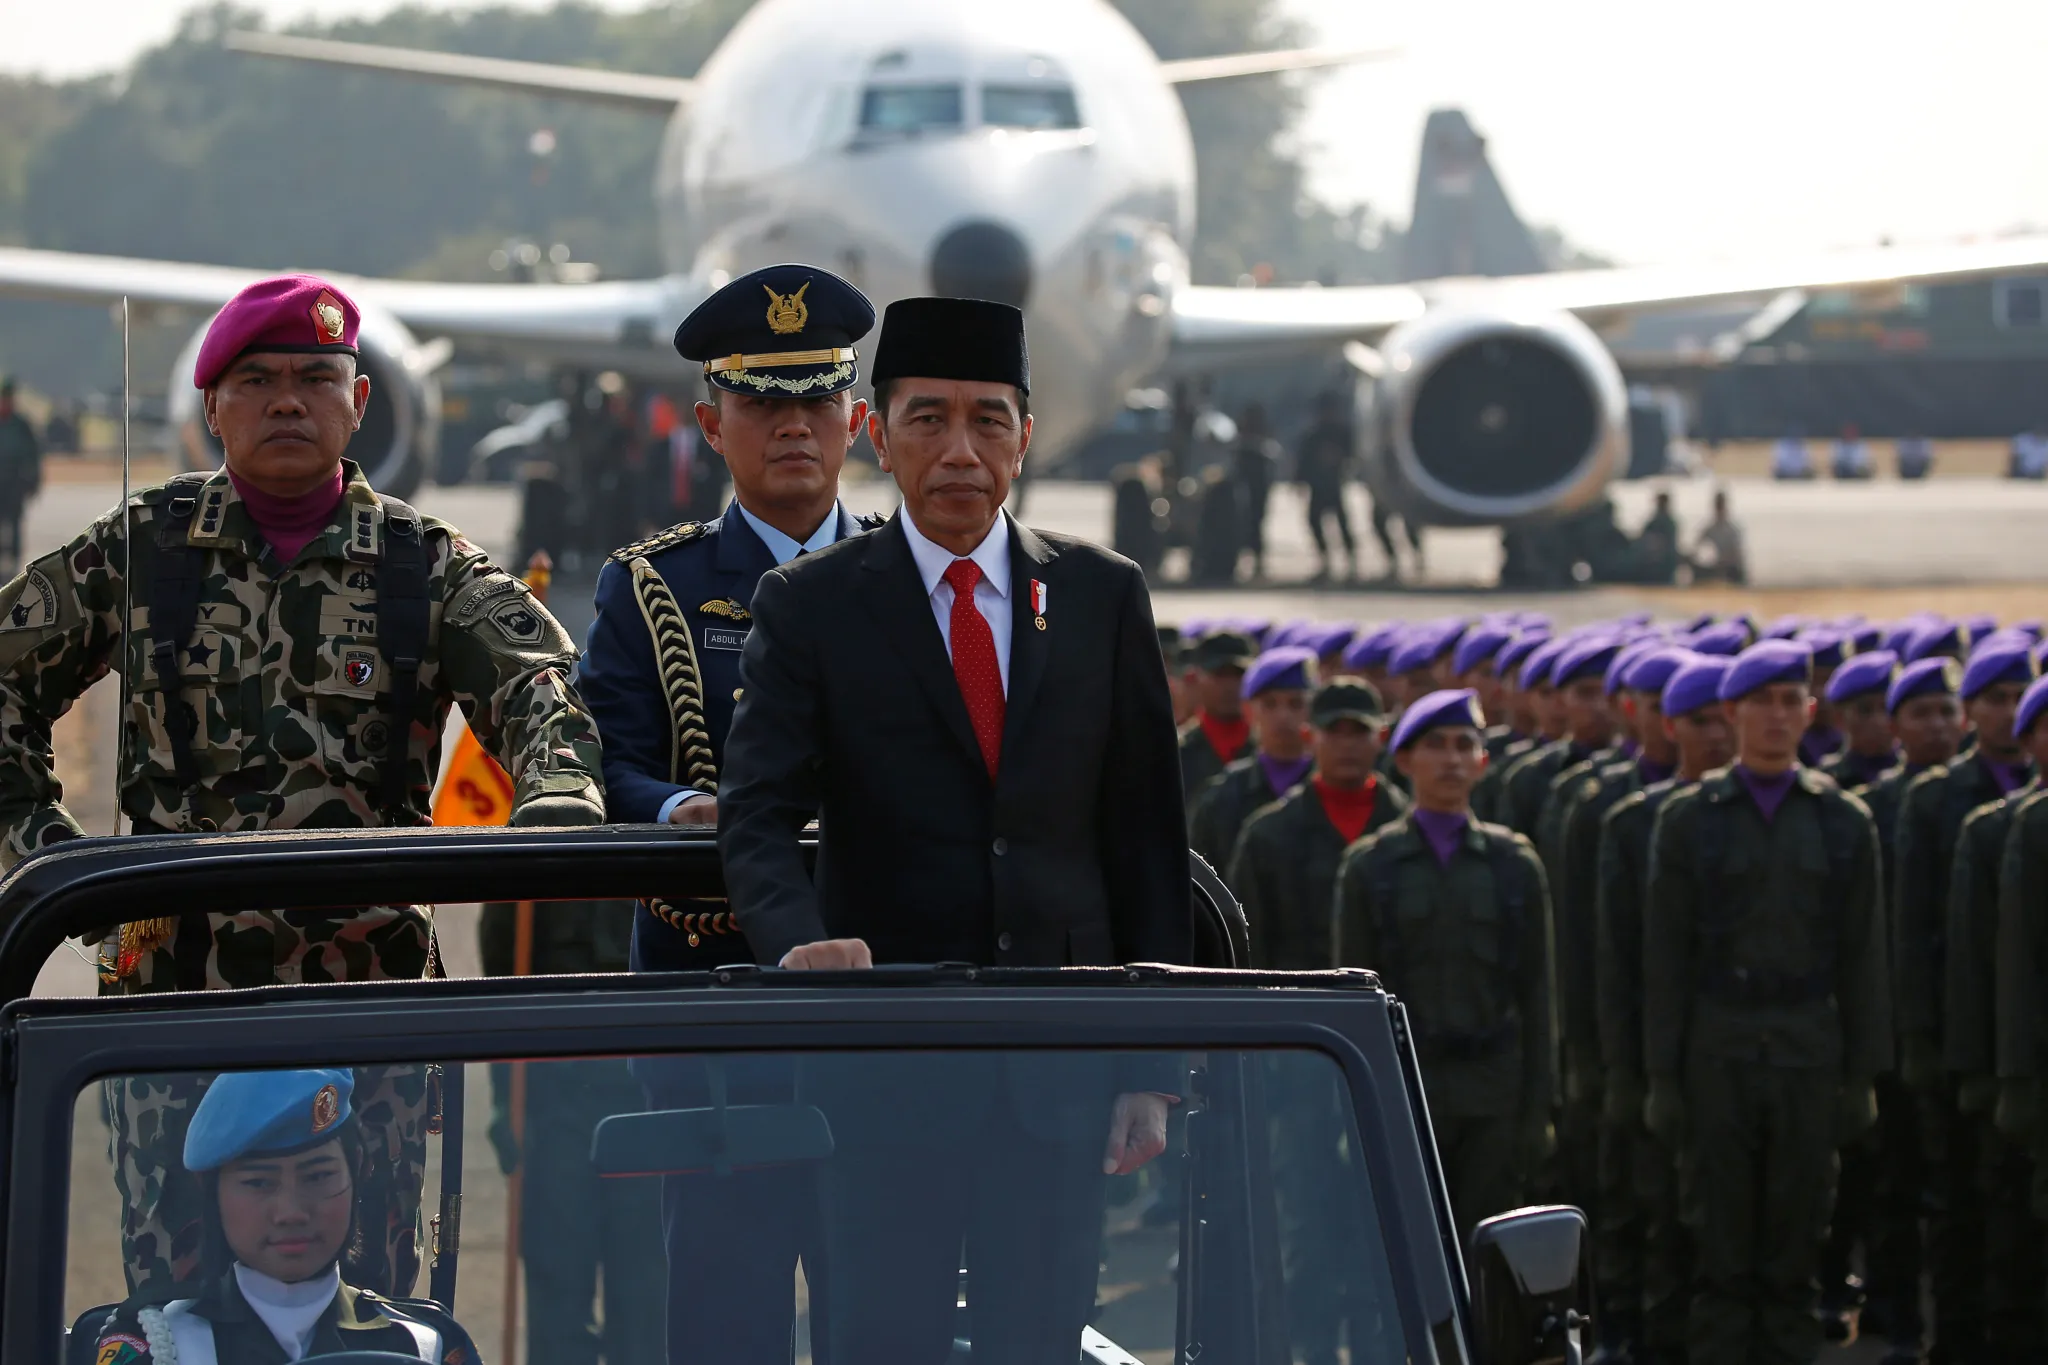 Generals Gaining Ground: Civil-Military Relations and Democracy in Indonesia